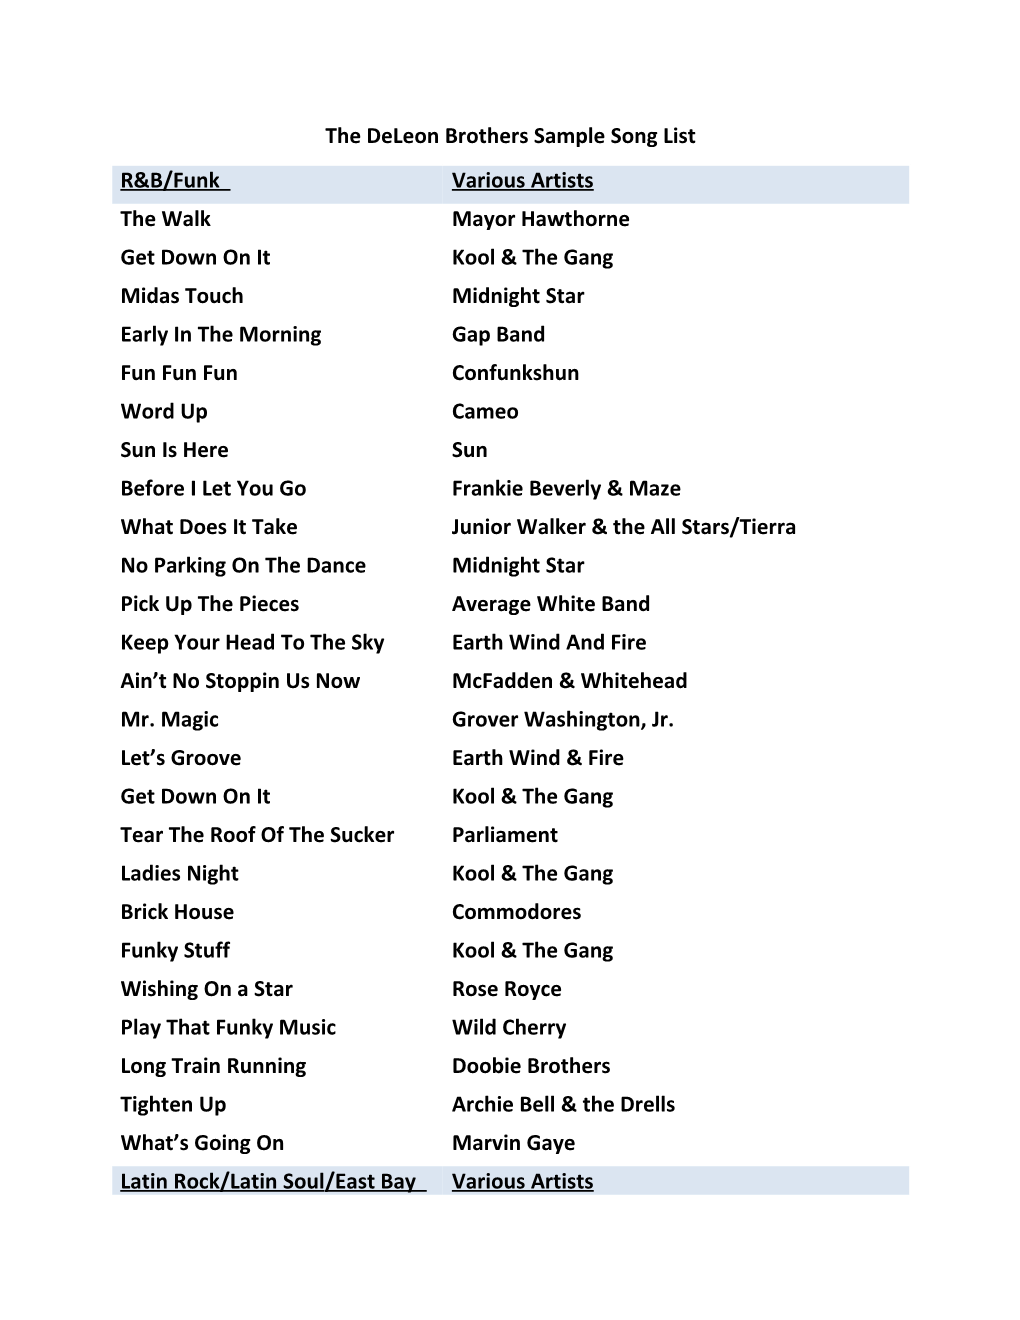 The Deleon Brothers Sample Song List